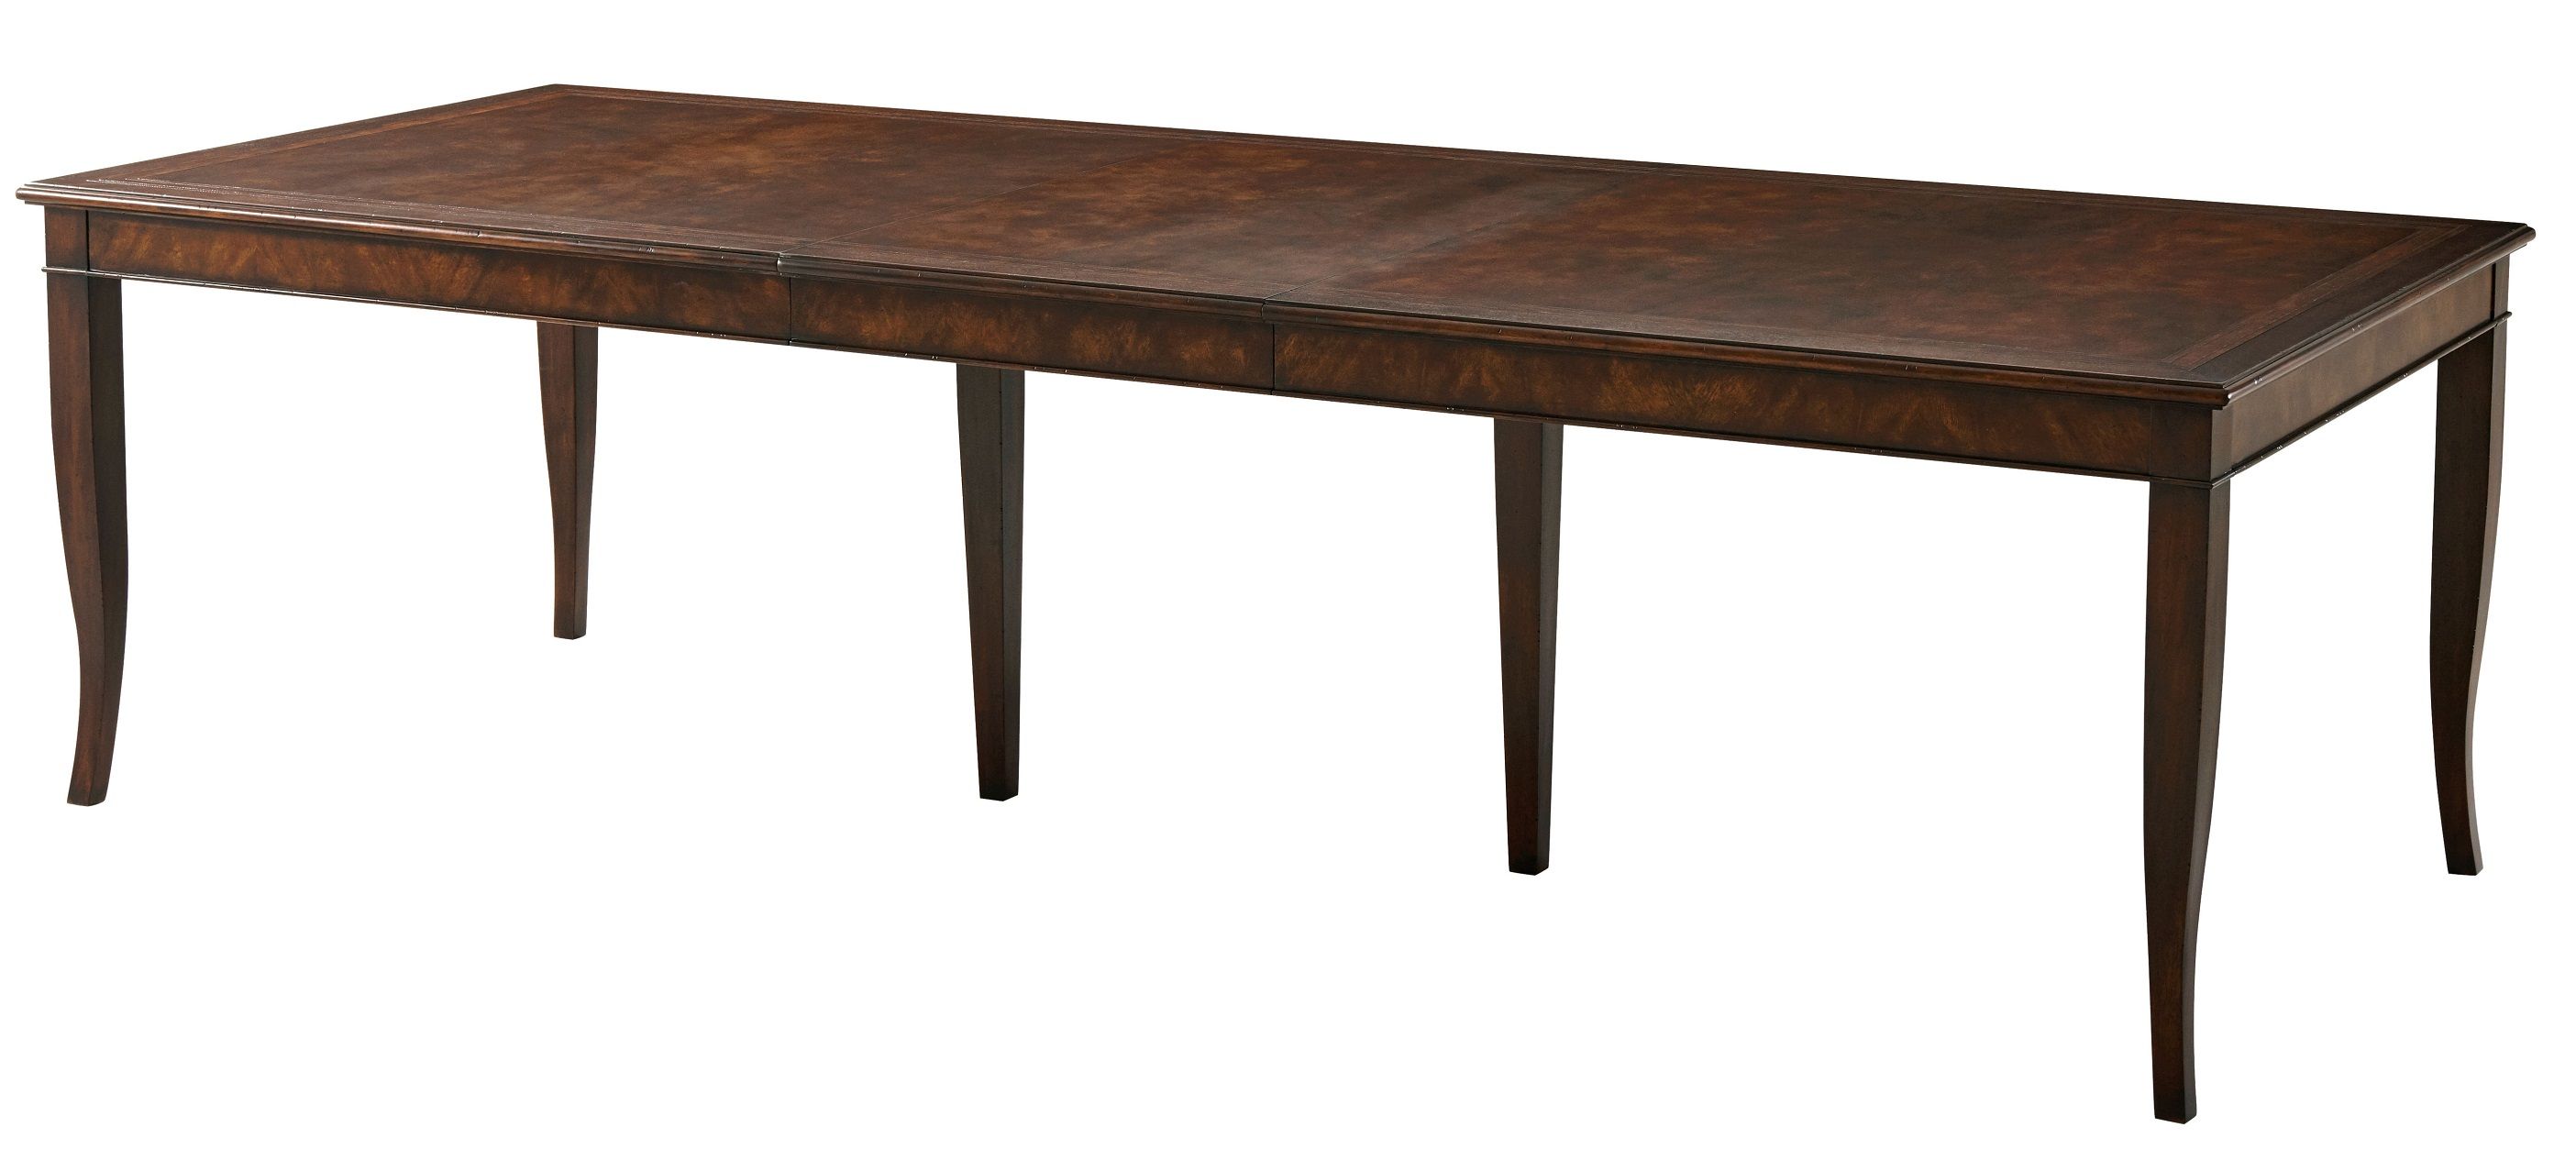 French-inspired dining table with rectangular crossbanded top